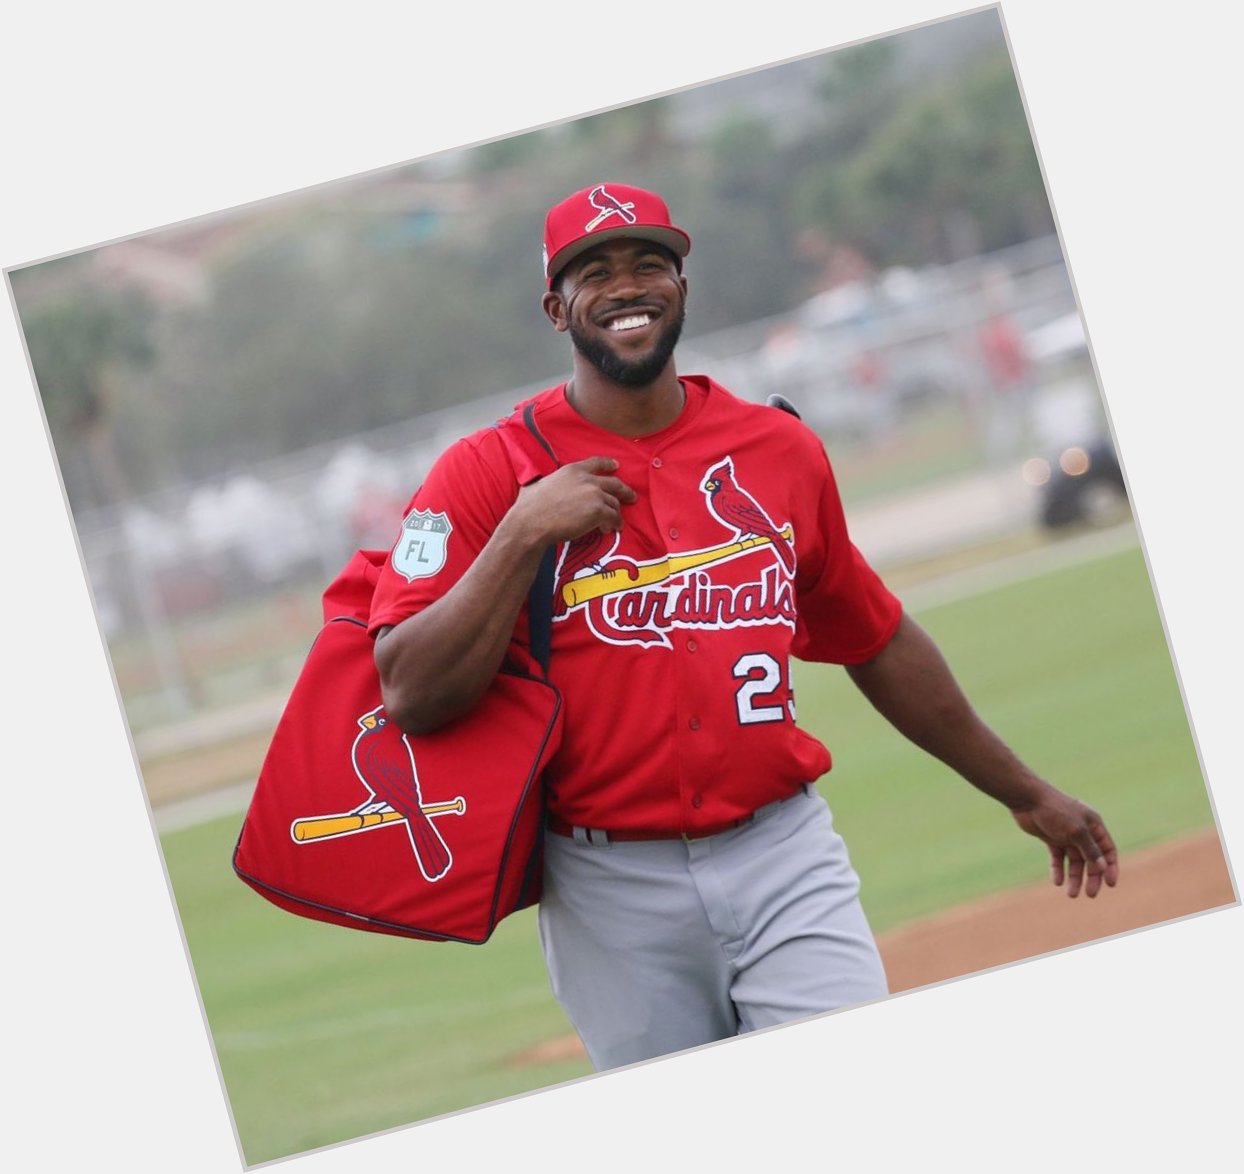 Happy birthday to Cardinals OF Dexter Fowler!! Can\t wait to see him debut at Busch Stadium in 11 days! 